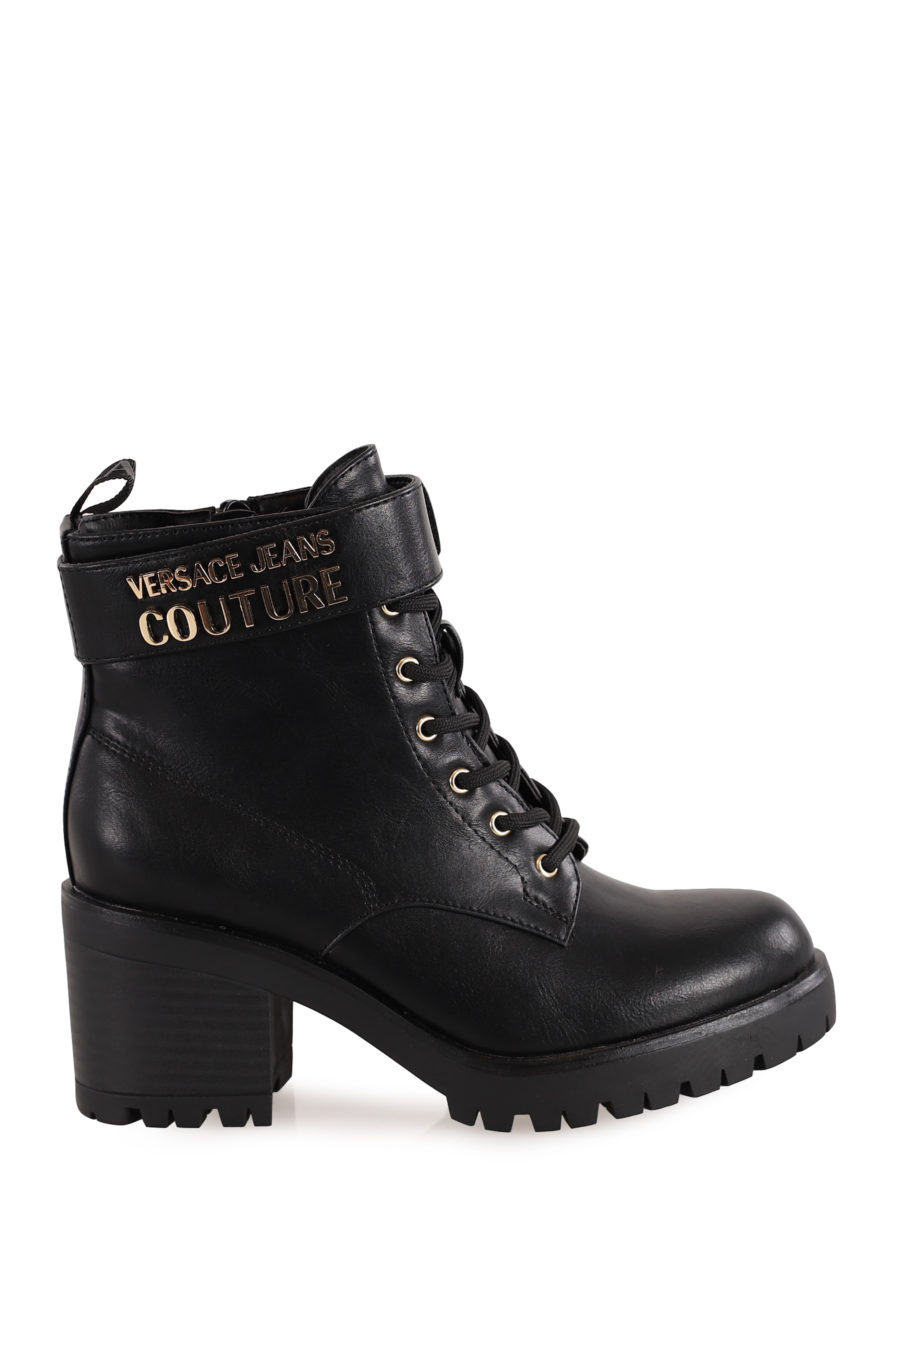 Black ankle boots with gold logo - IMG 0156